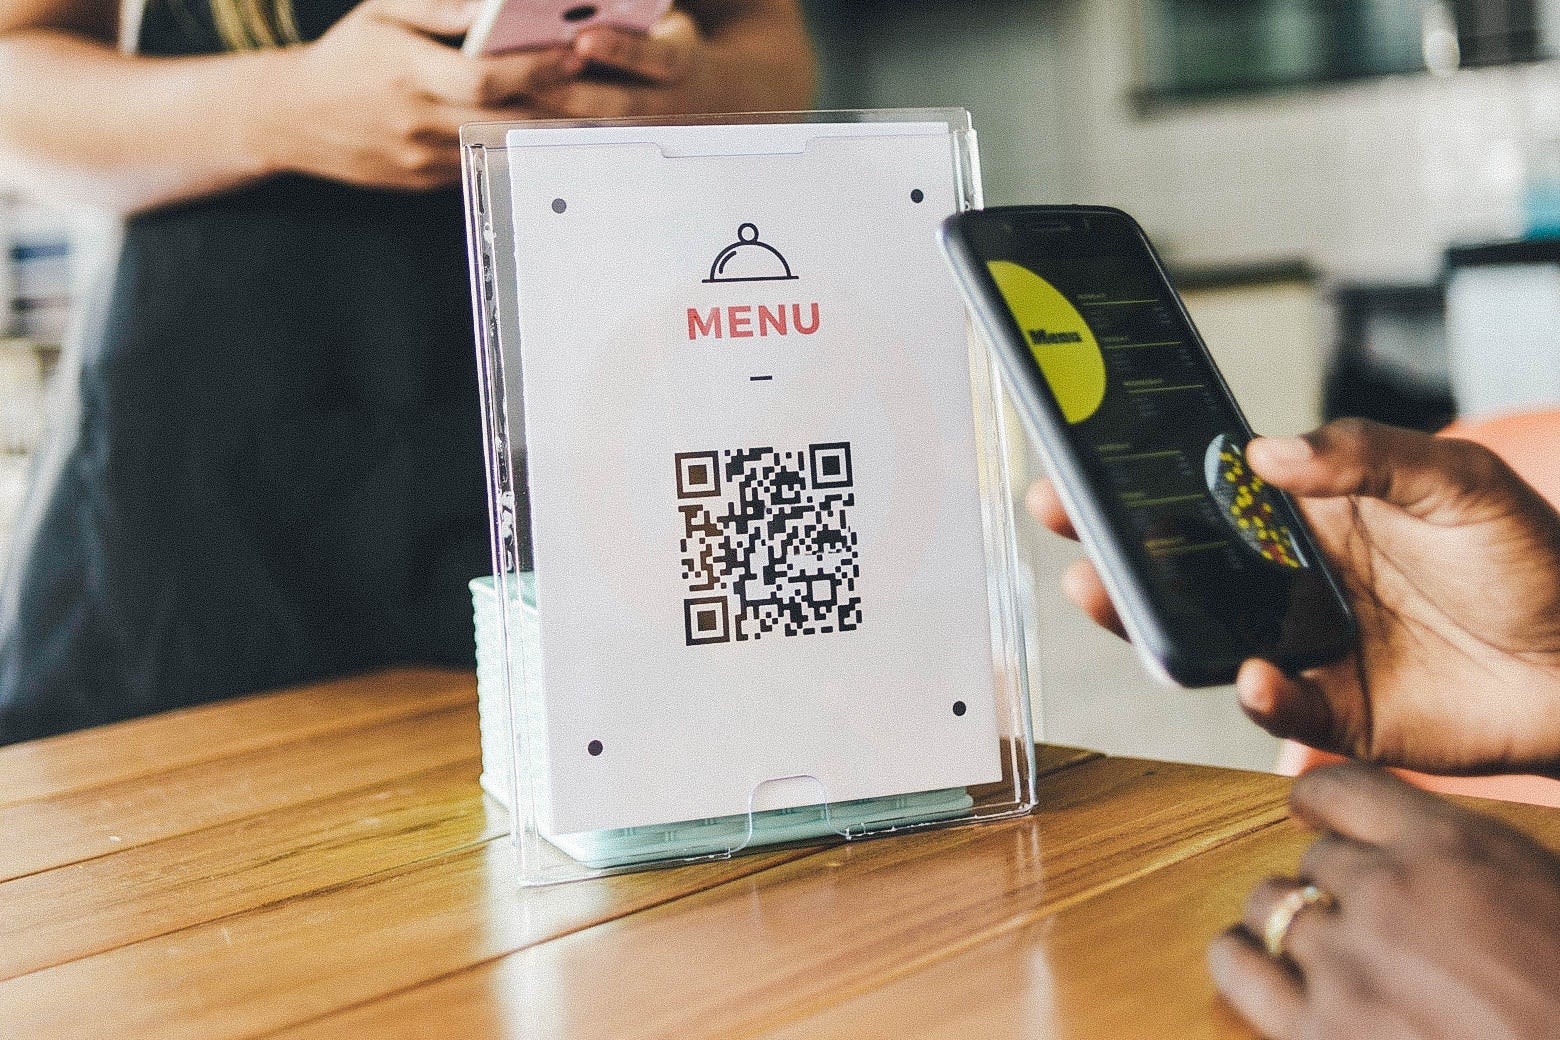 A QR code on a sheet of paper labeled "MENU" standing upright on a table. Someone holds their phone up to the code to scan it, displaying the menu on the smartphone screen.